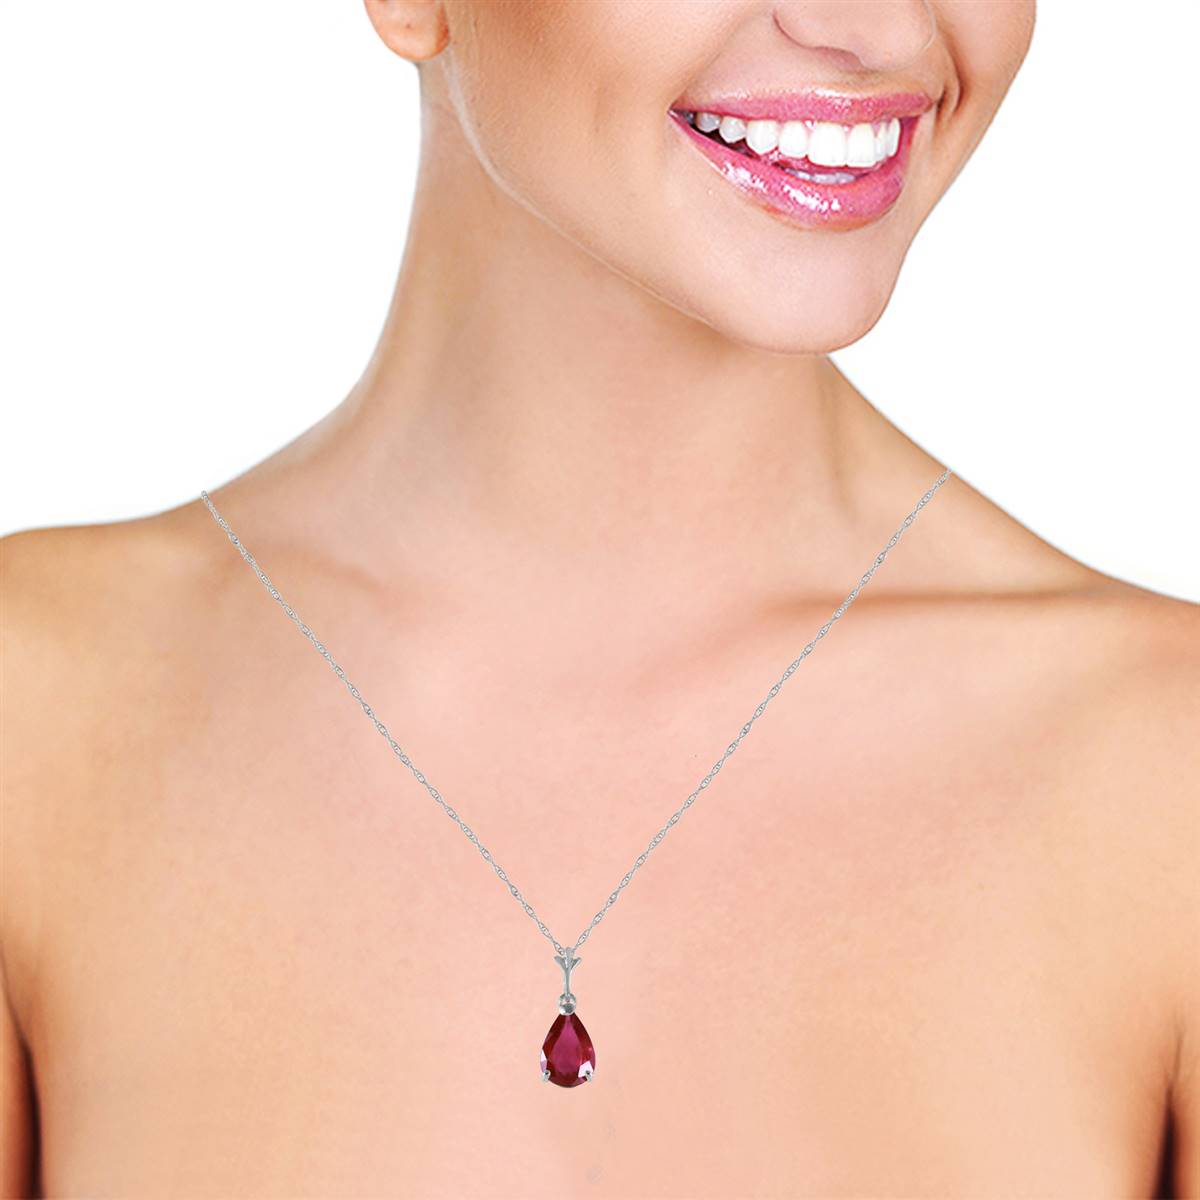 1.75 Carat 14K Solid White Gold Sense Passionately Ruby Necklace